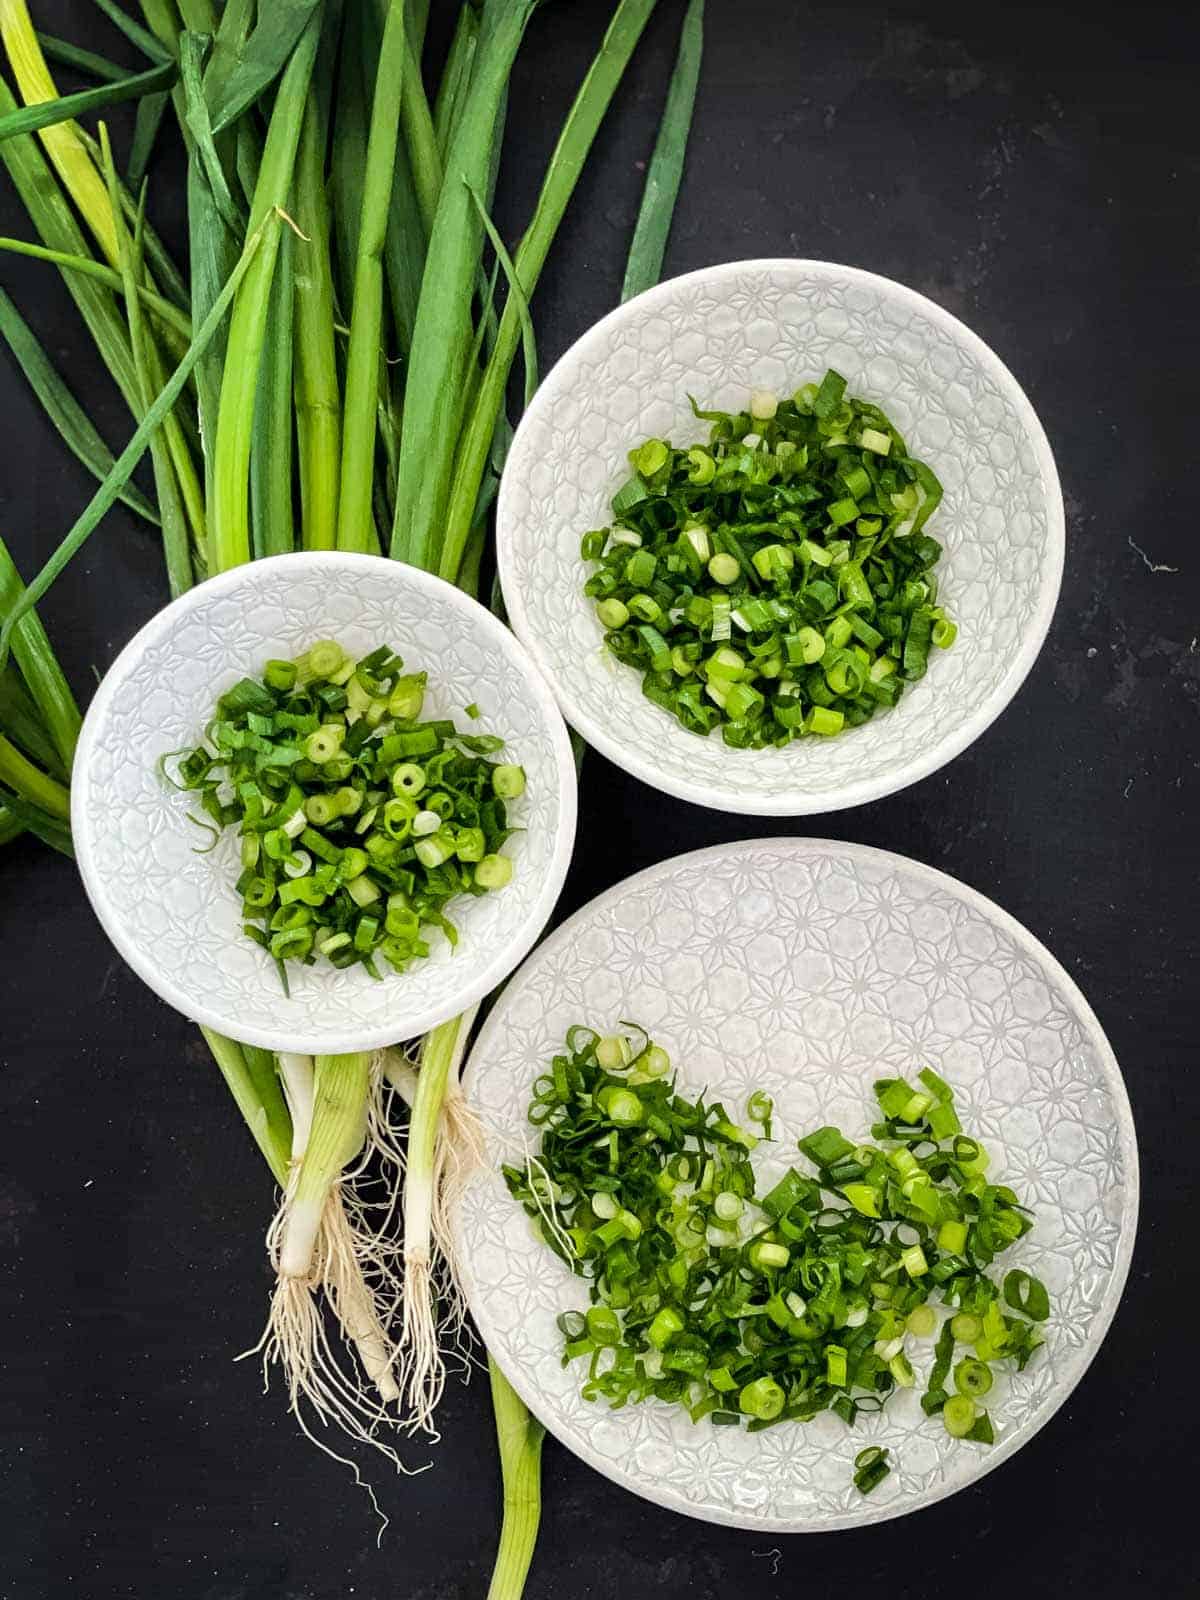 Chopped scallions served in a variety of bowls and plates